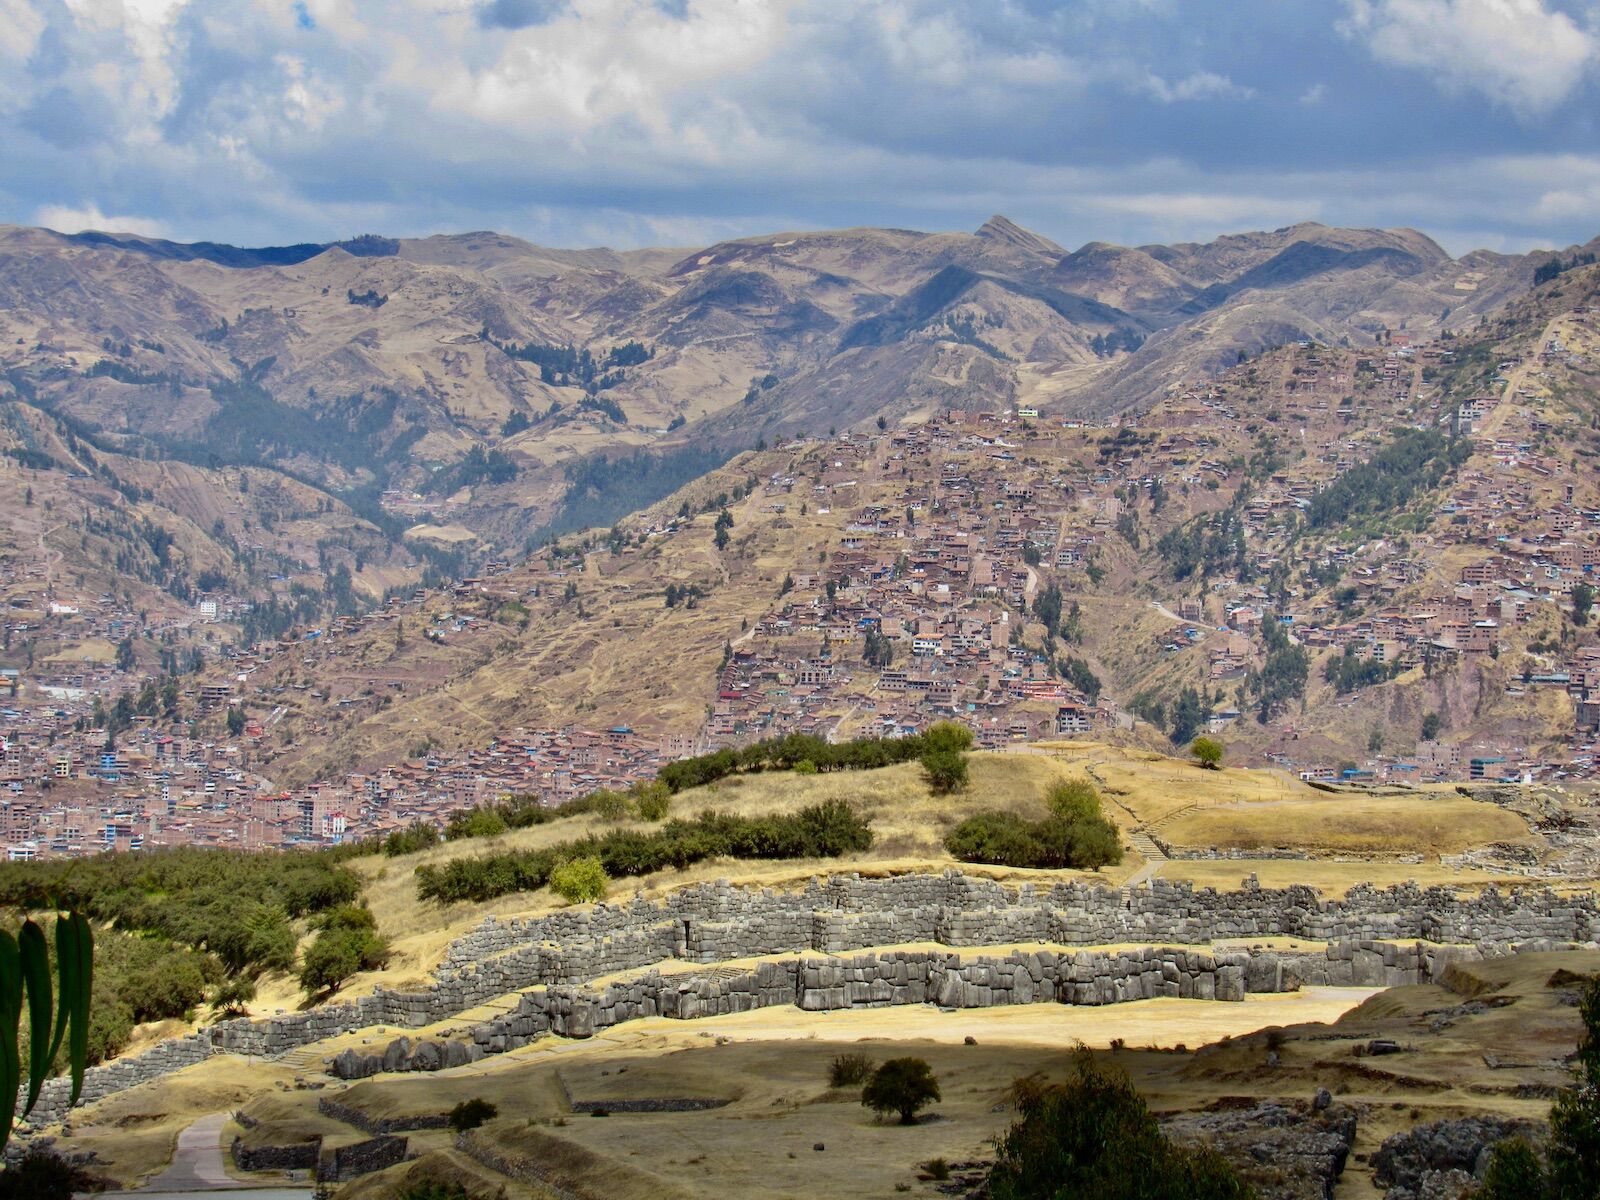 Cusco archeological site of Sacsayhuaman from above